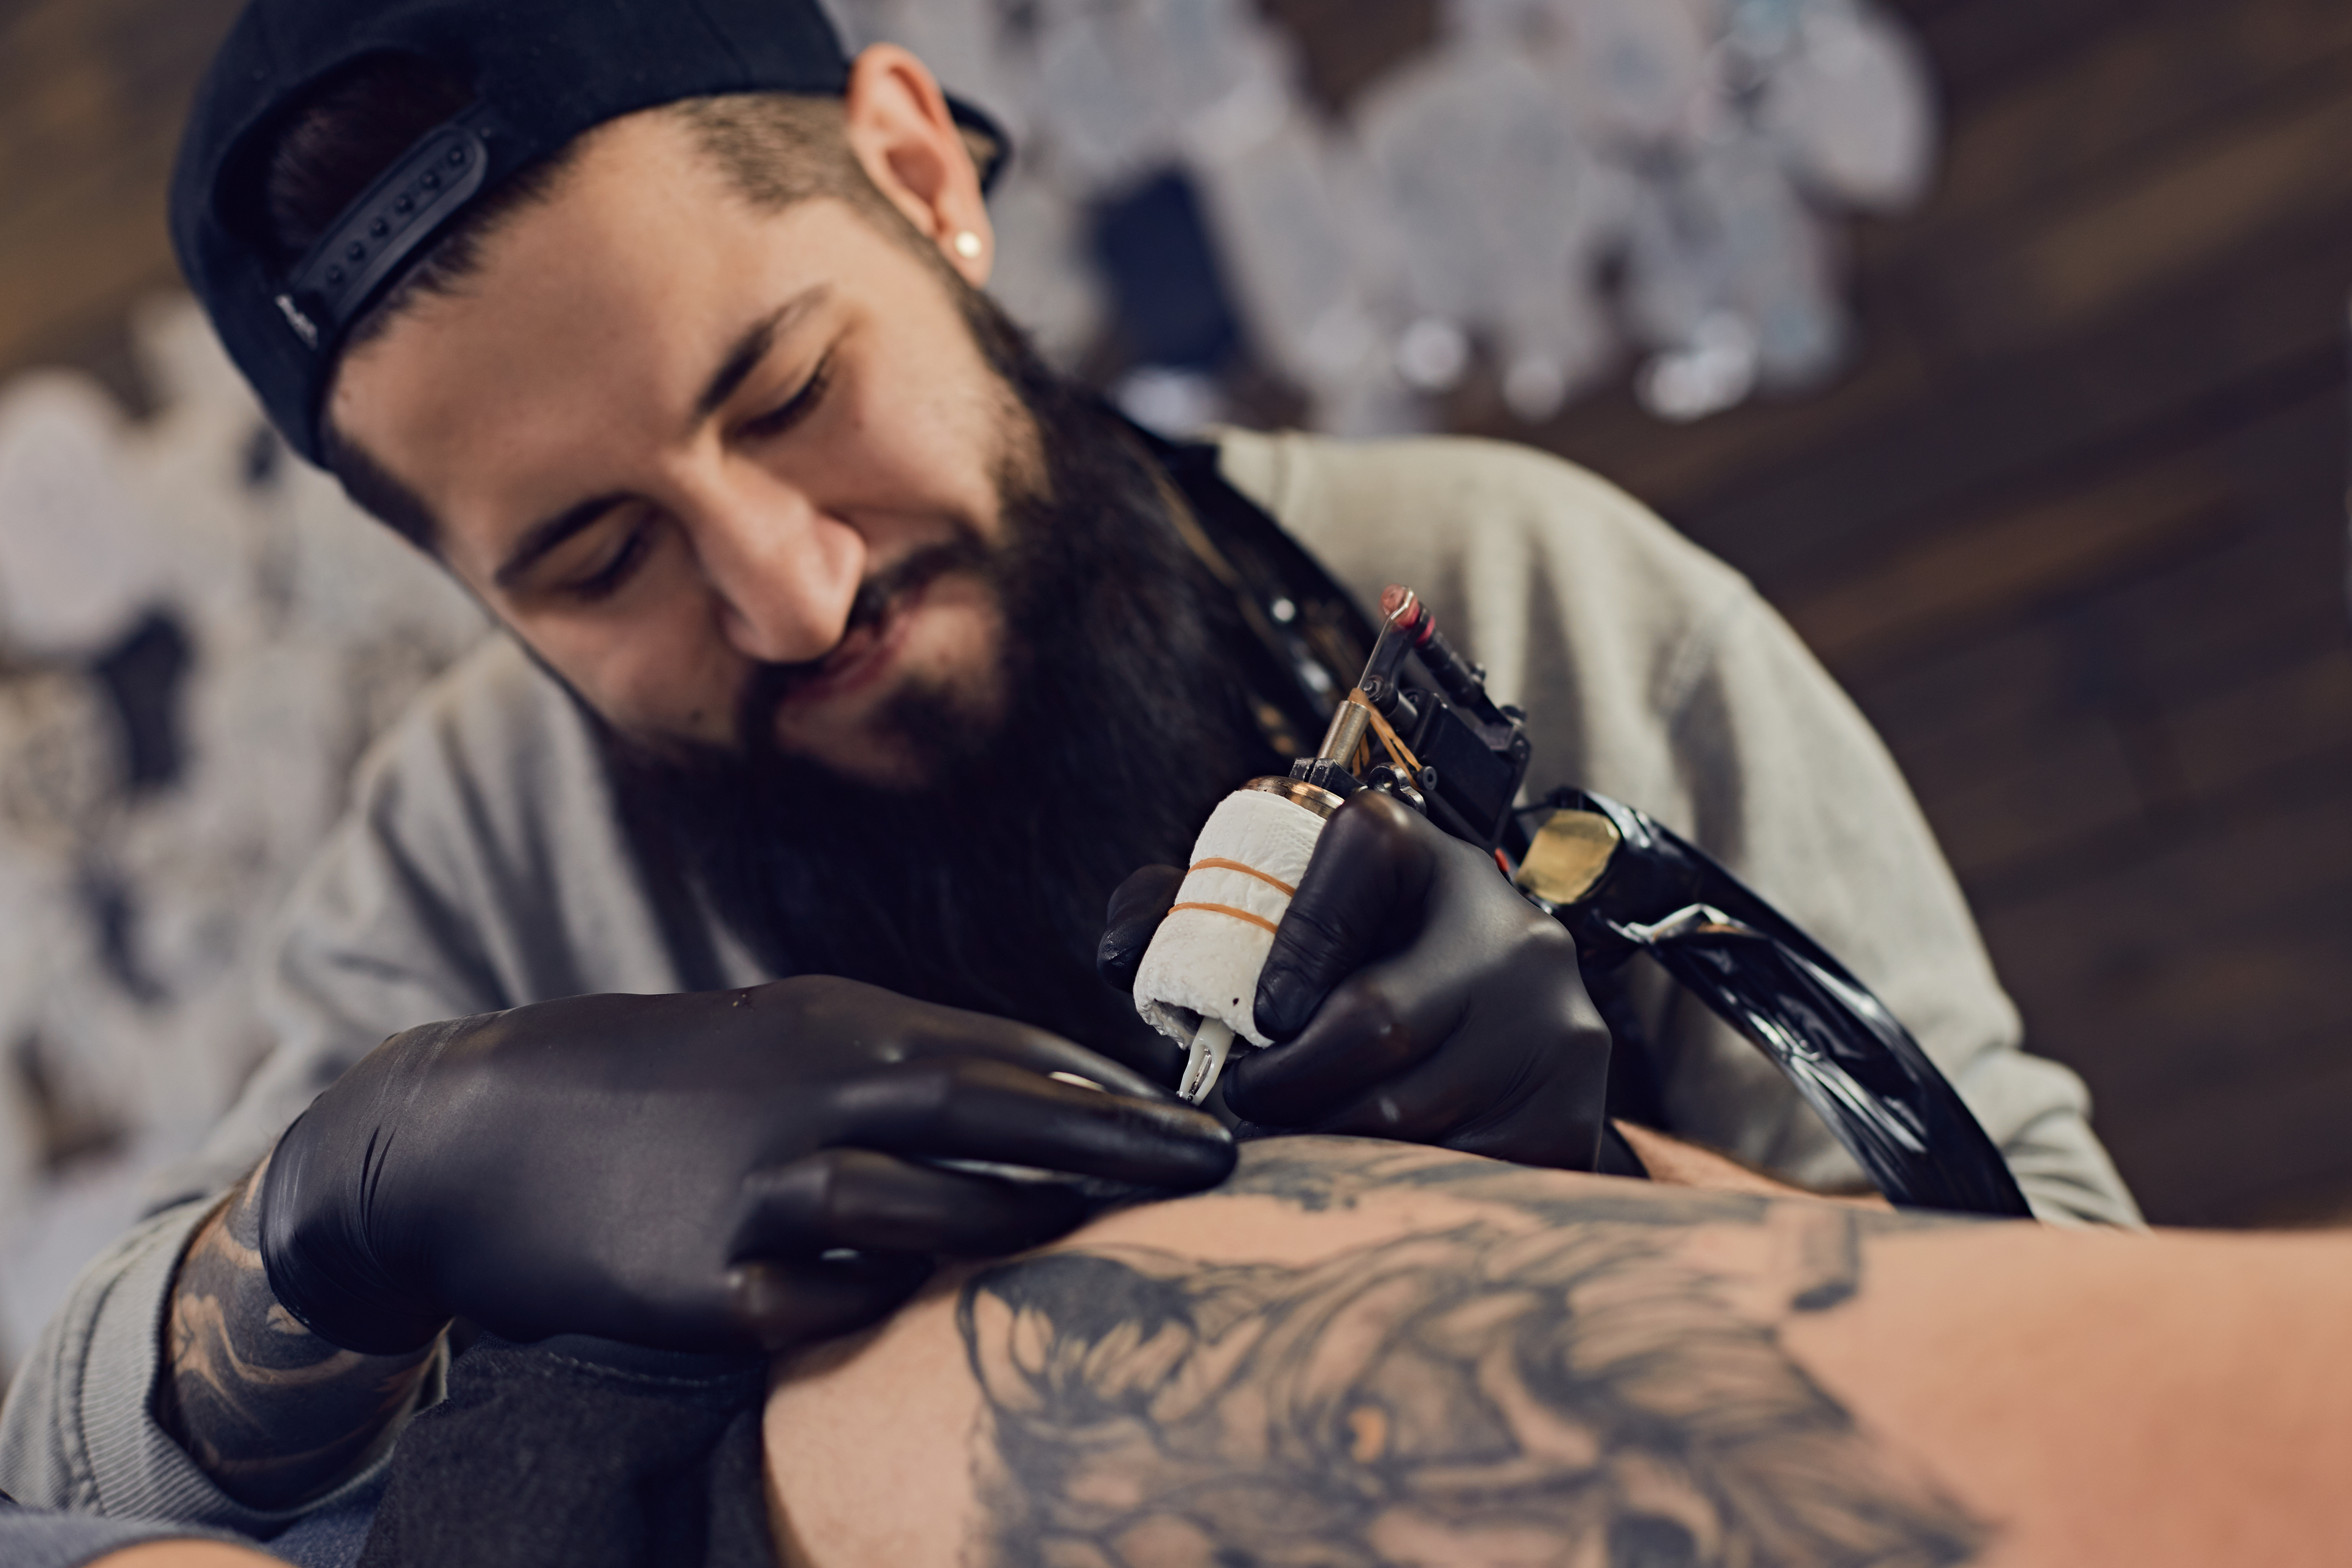 Permanent Tattoo Artists at Rs 1500 in Gurgaon